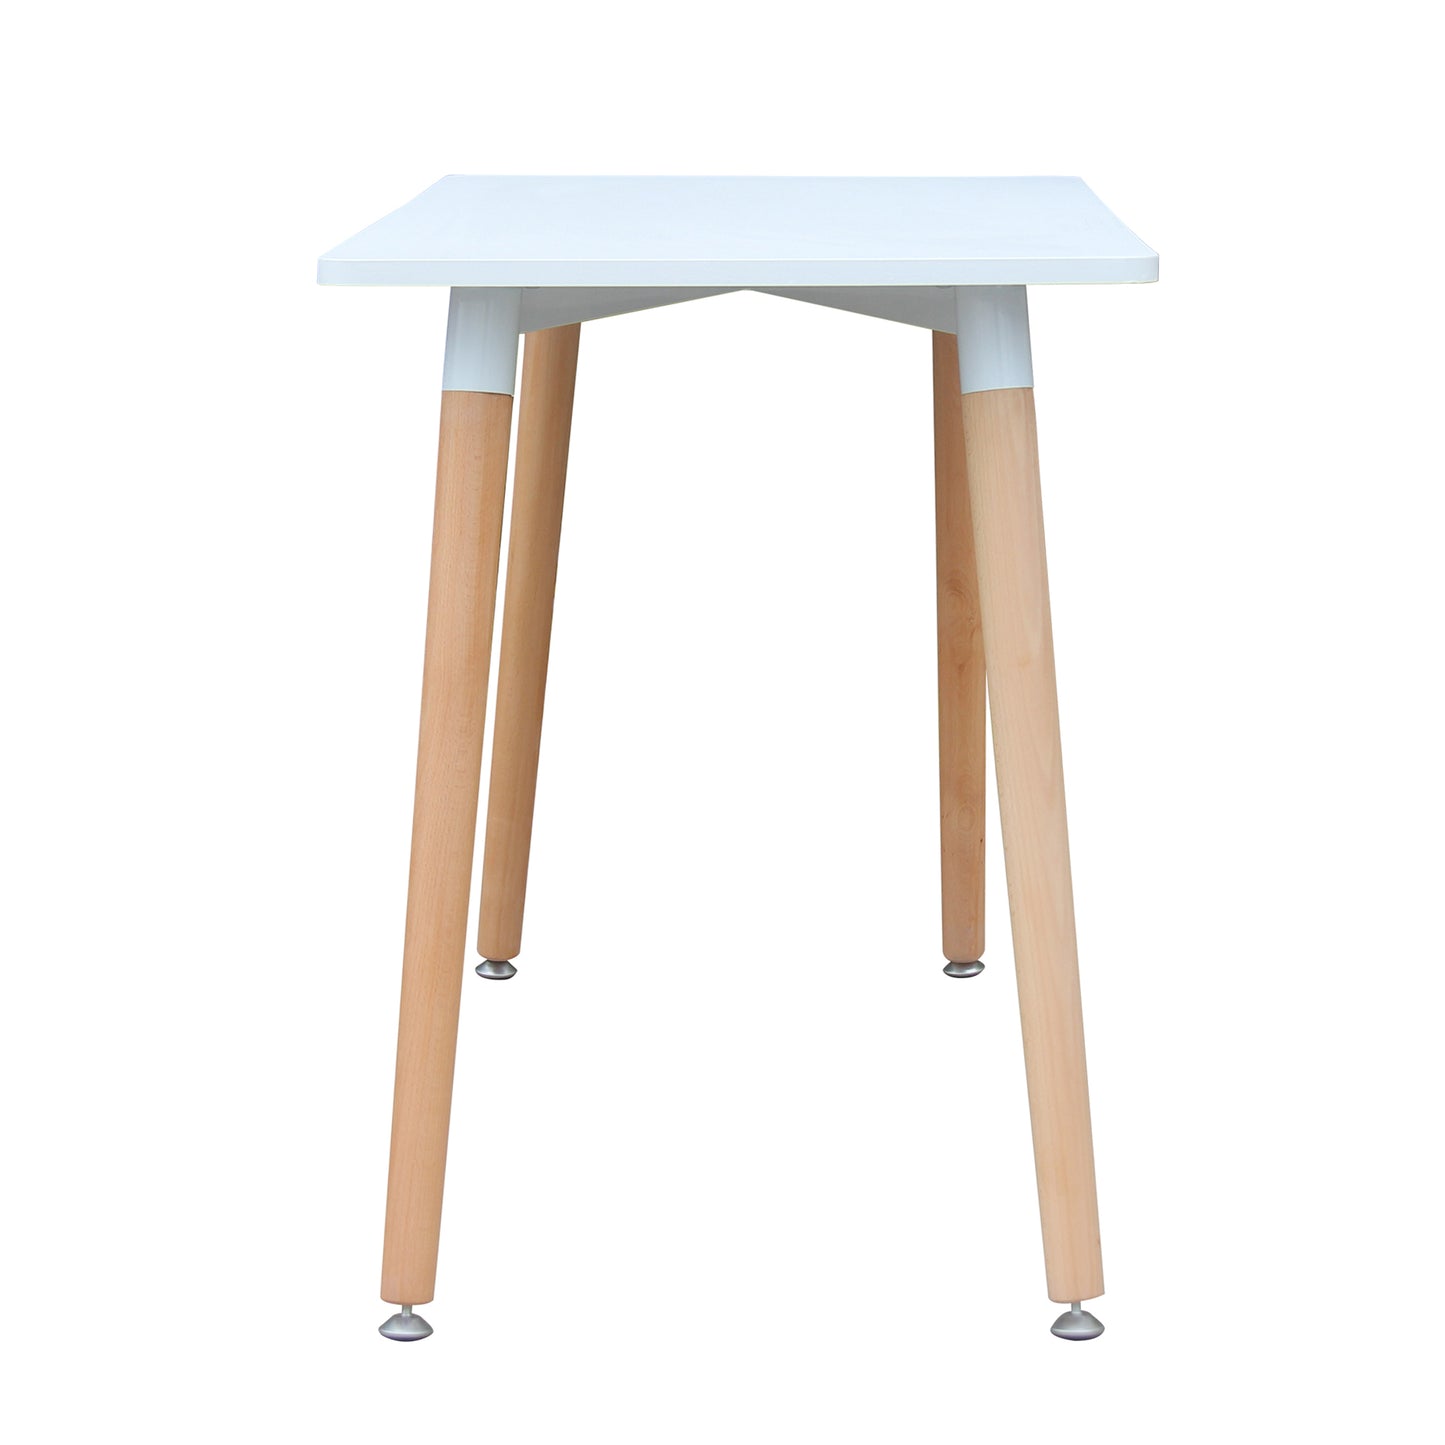 CHOTTO - Hako Rectangle Top Dining Table with Wooden Legs - White - 120cm